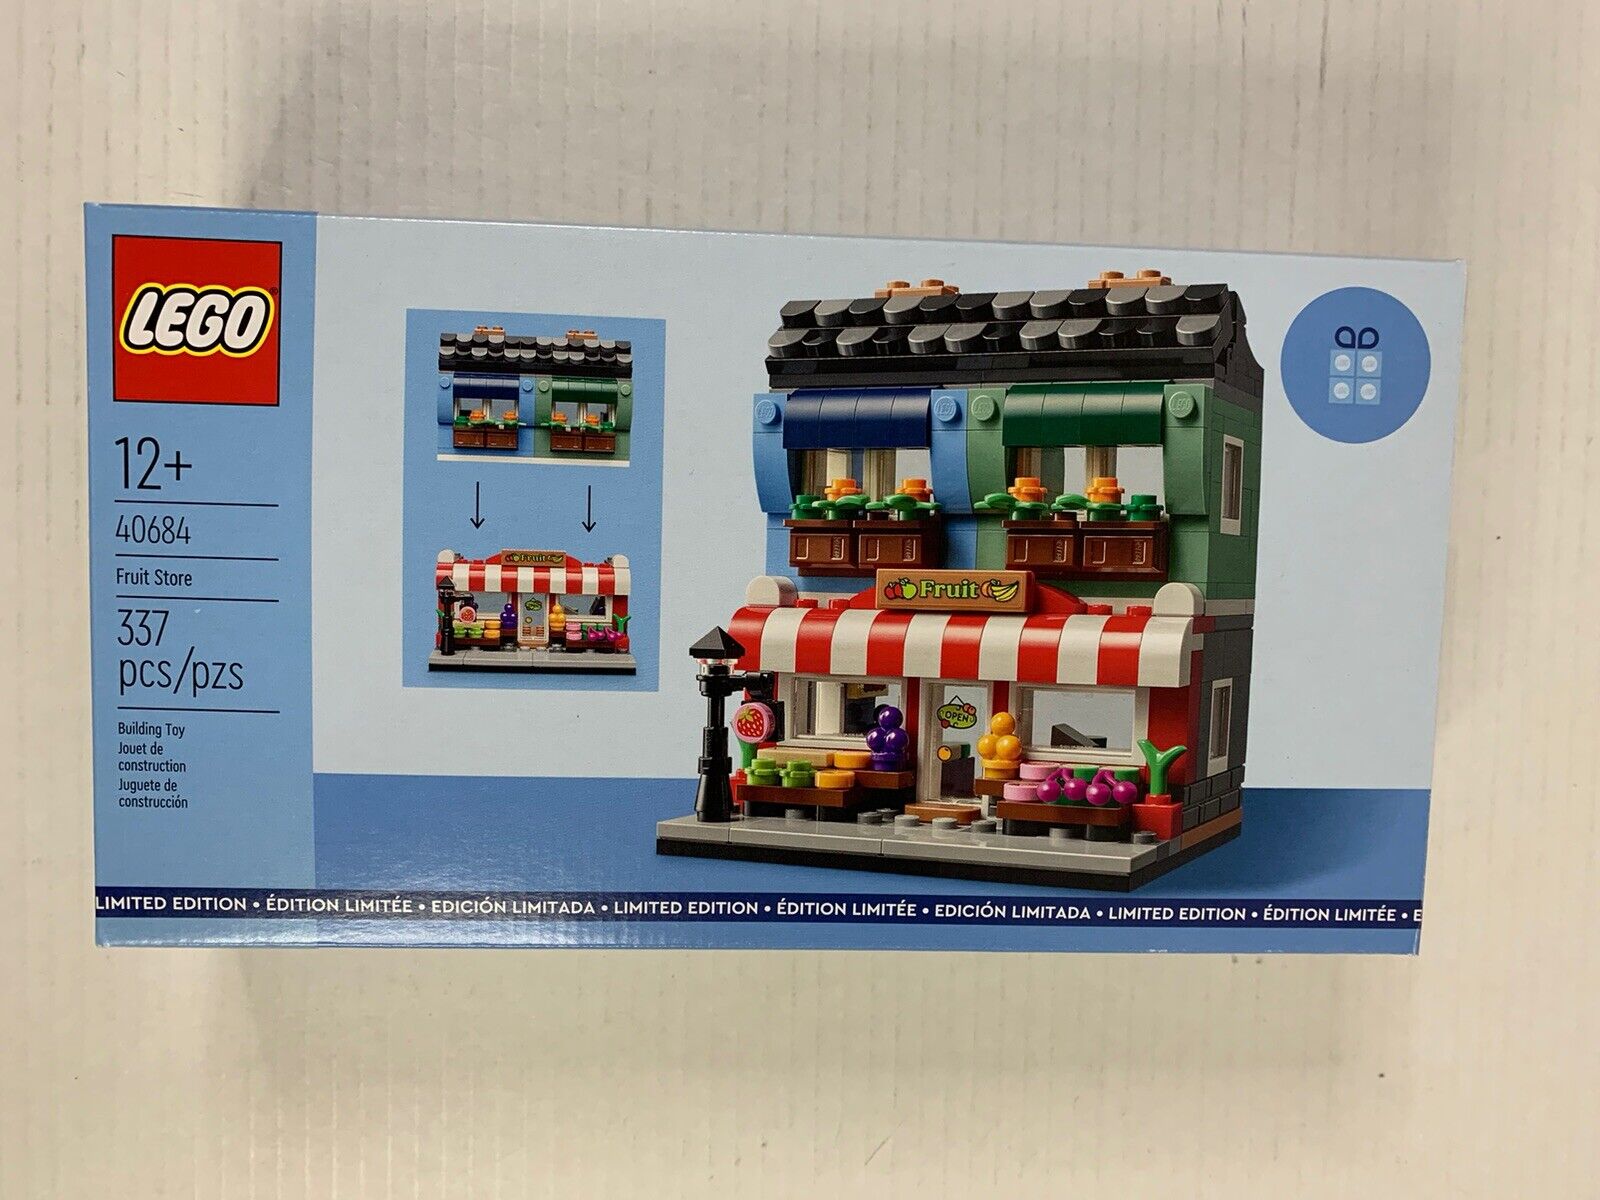 Lego 40684 Fruit Store Limited Edition - New Factory Sealed - Ready to ship